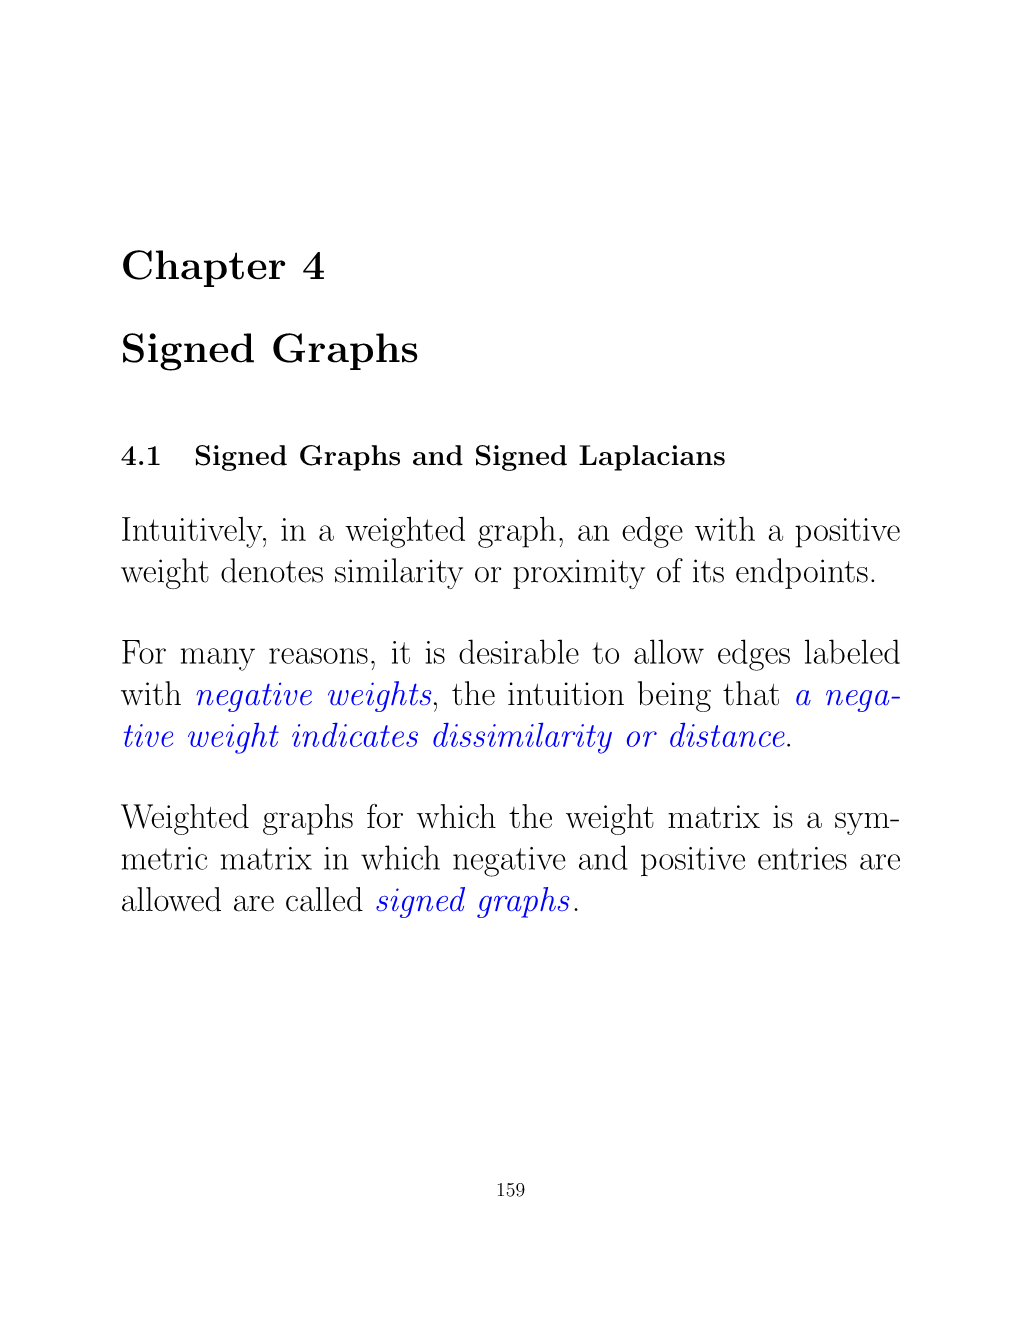 Chapter 4 Signed Graphs